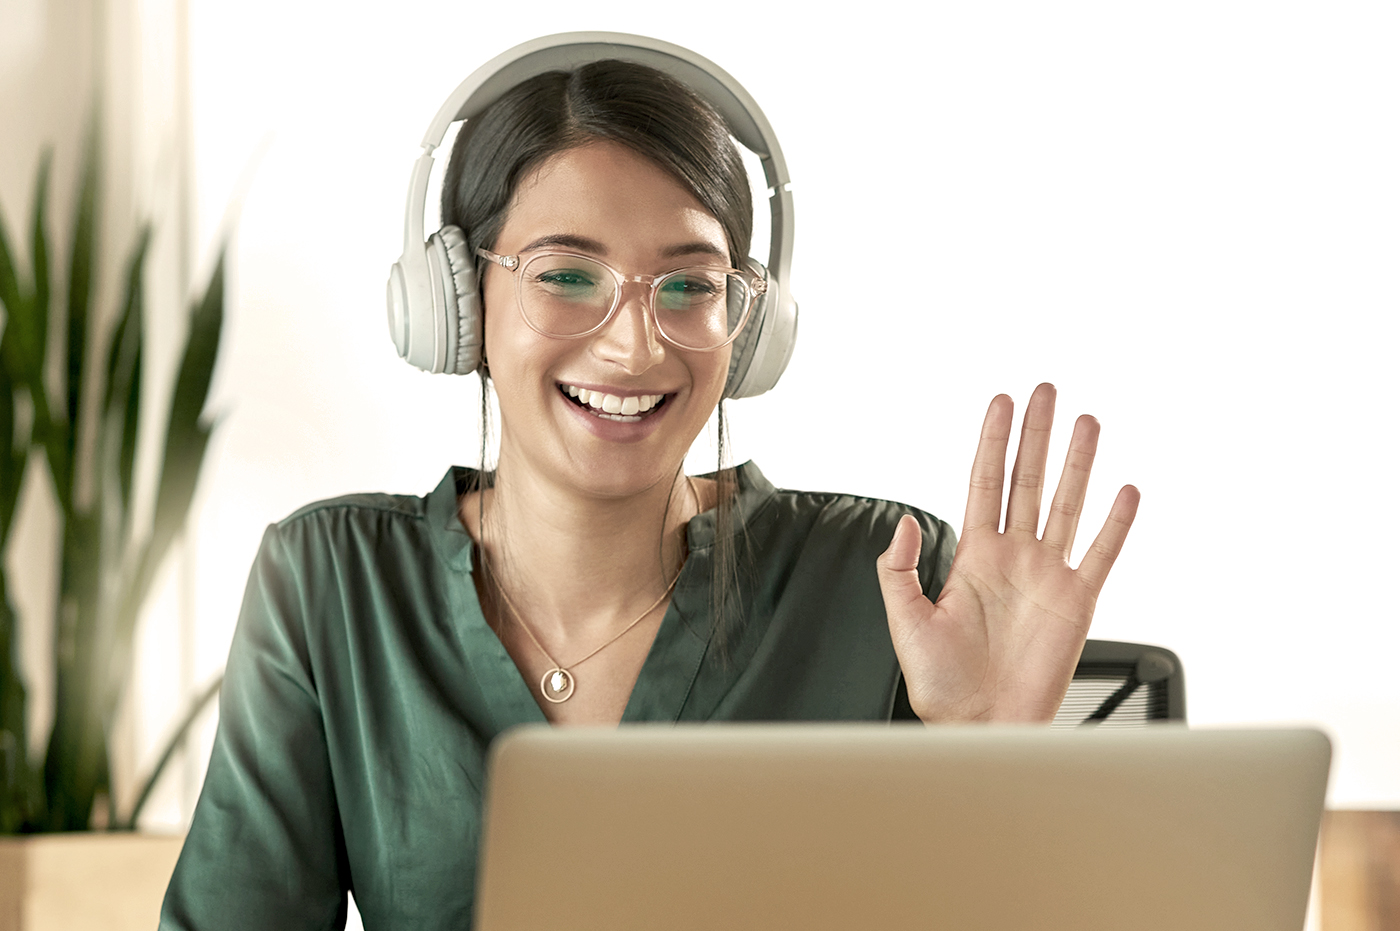 A woman greeting coworkers in an online video conference.